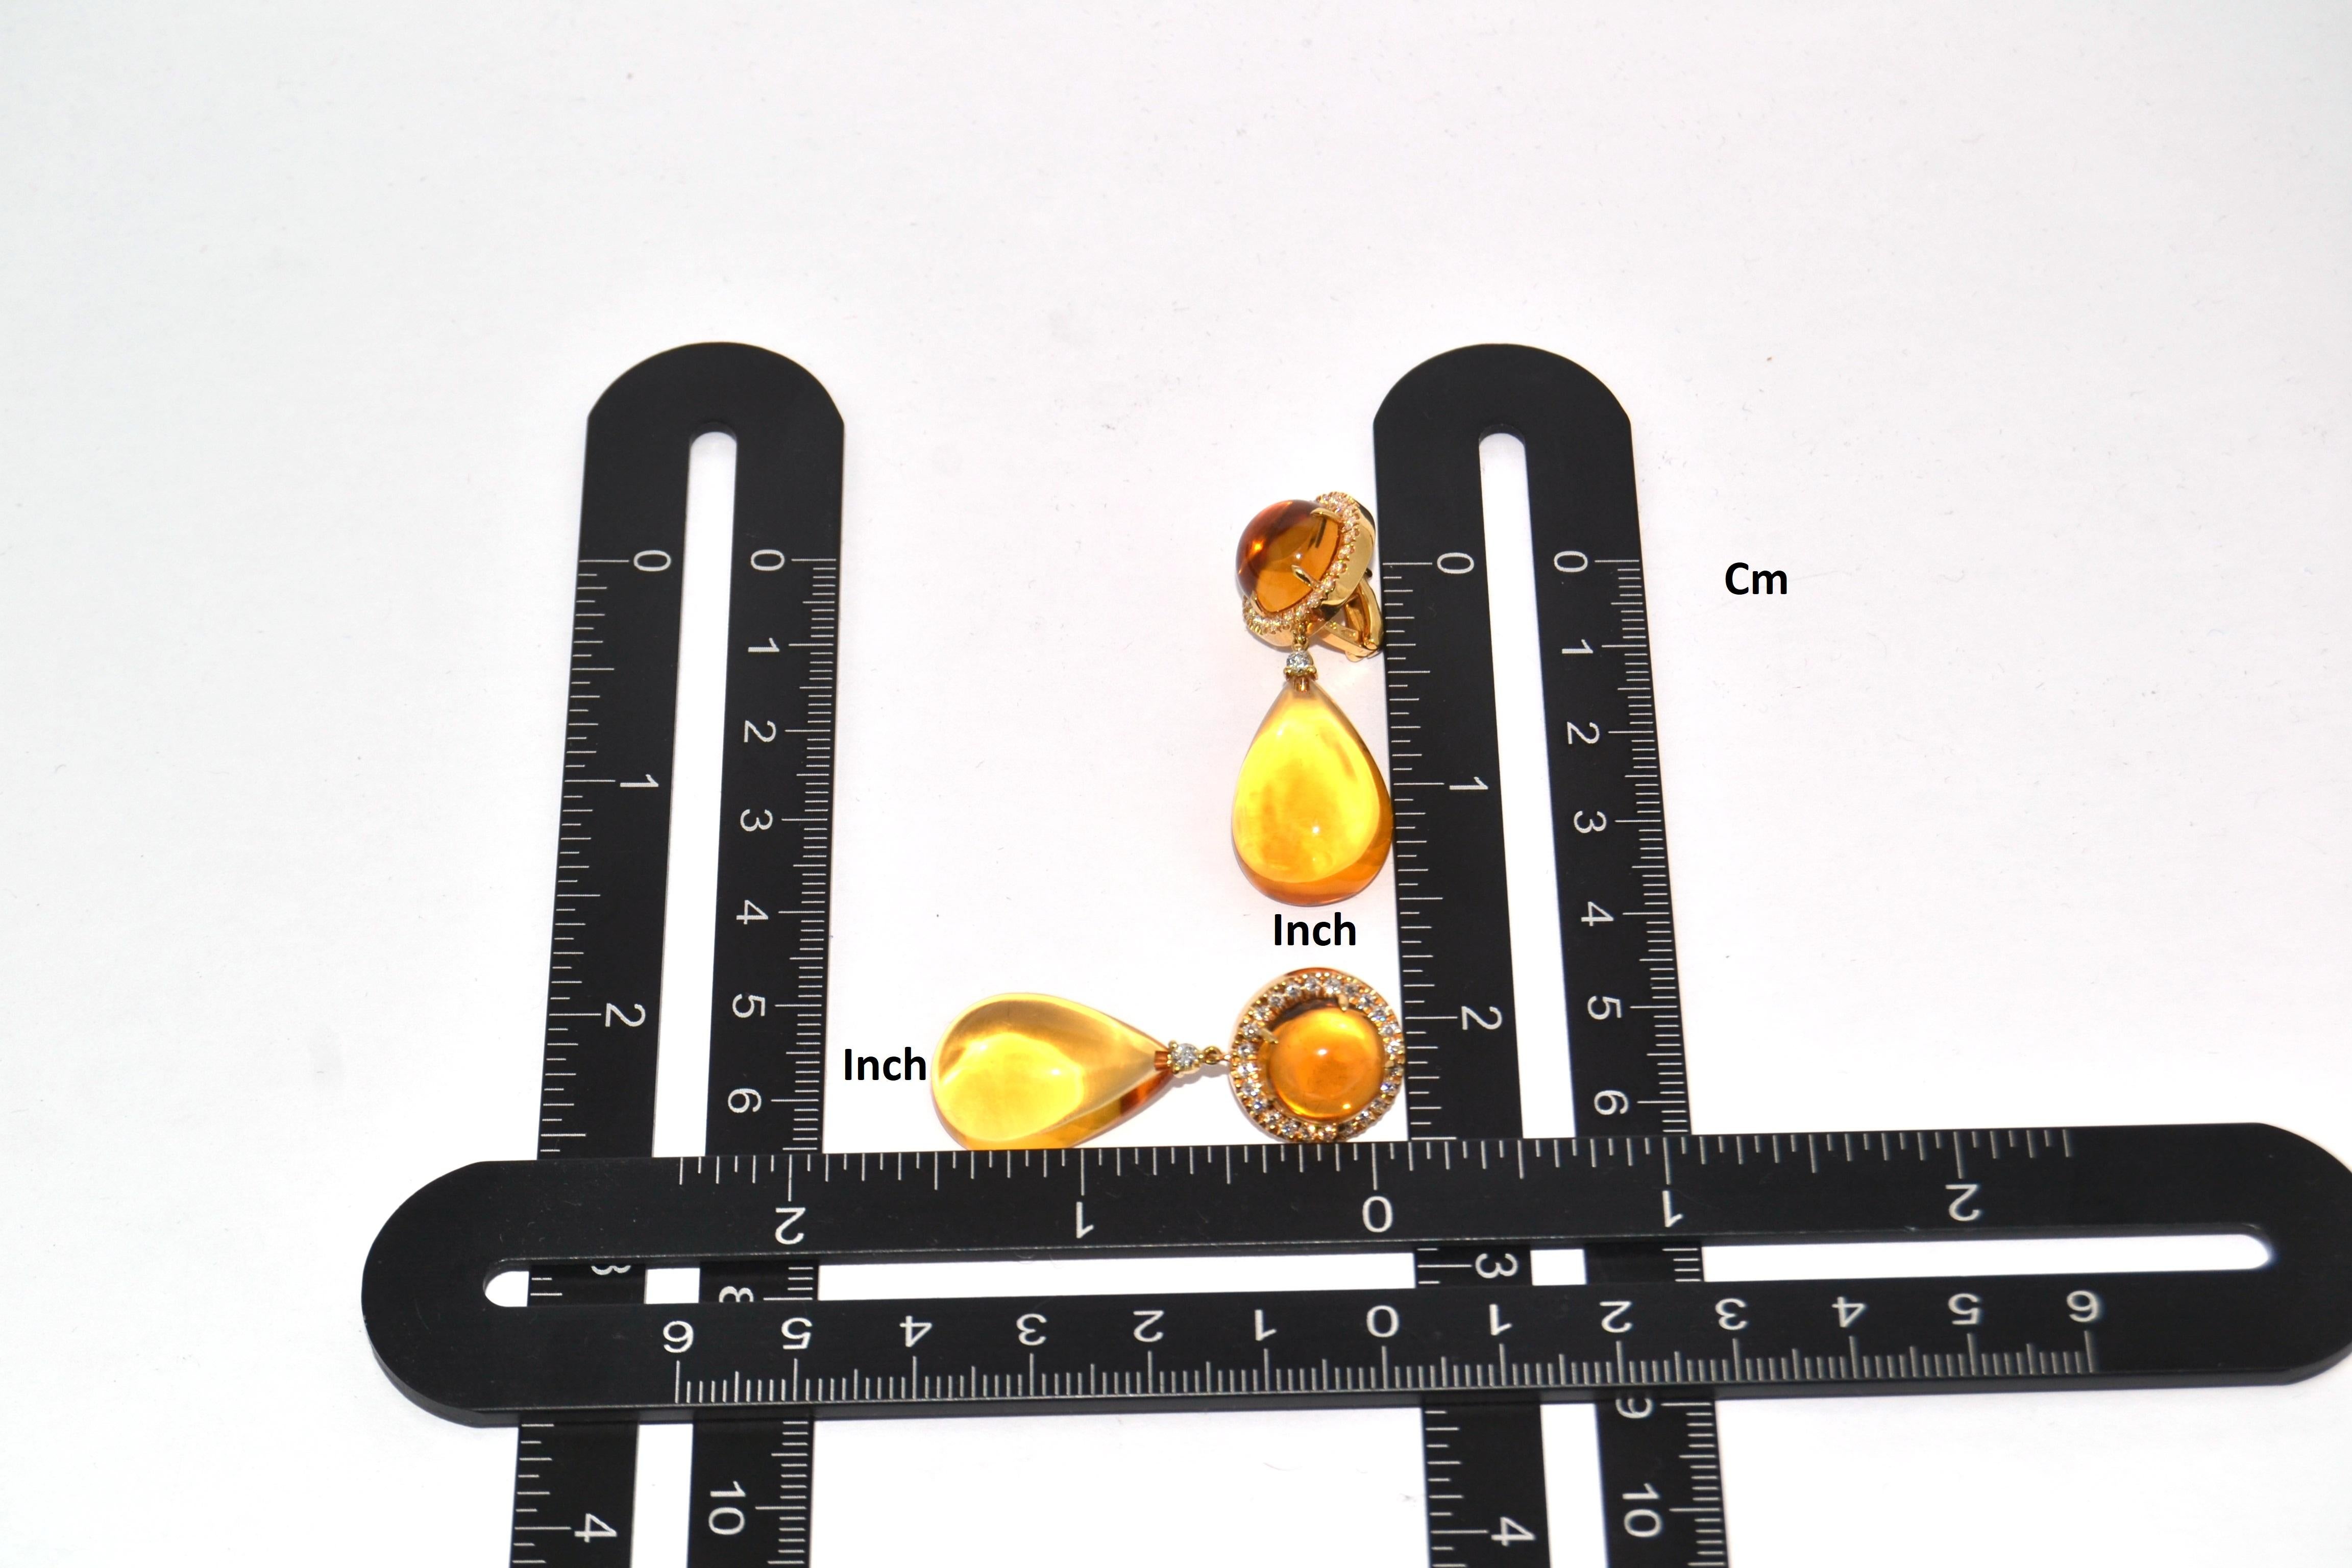 Handcrafted in Margherita Burgener family workshop  based in Valenza, Italy, the lovely earrings are realised in yellow gold.
The top part of the earrings centers round cabochon cut citrine quartz.
A single diamond is connecting the top with the